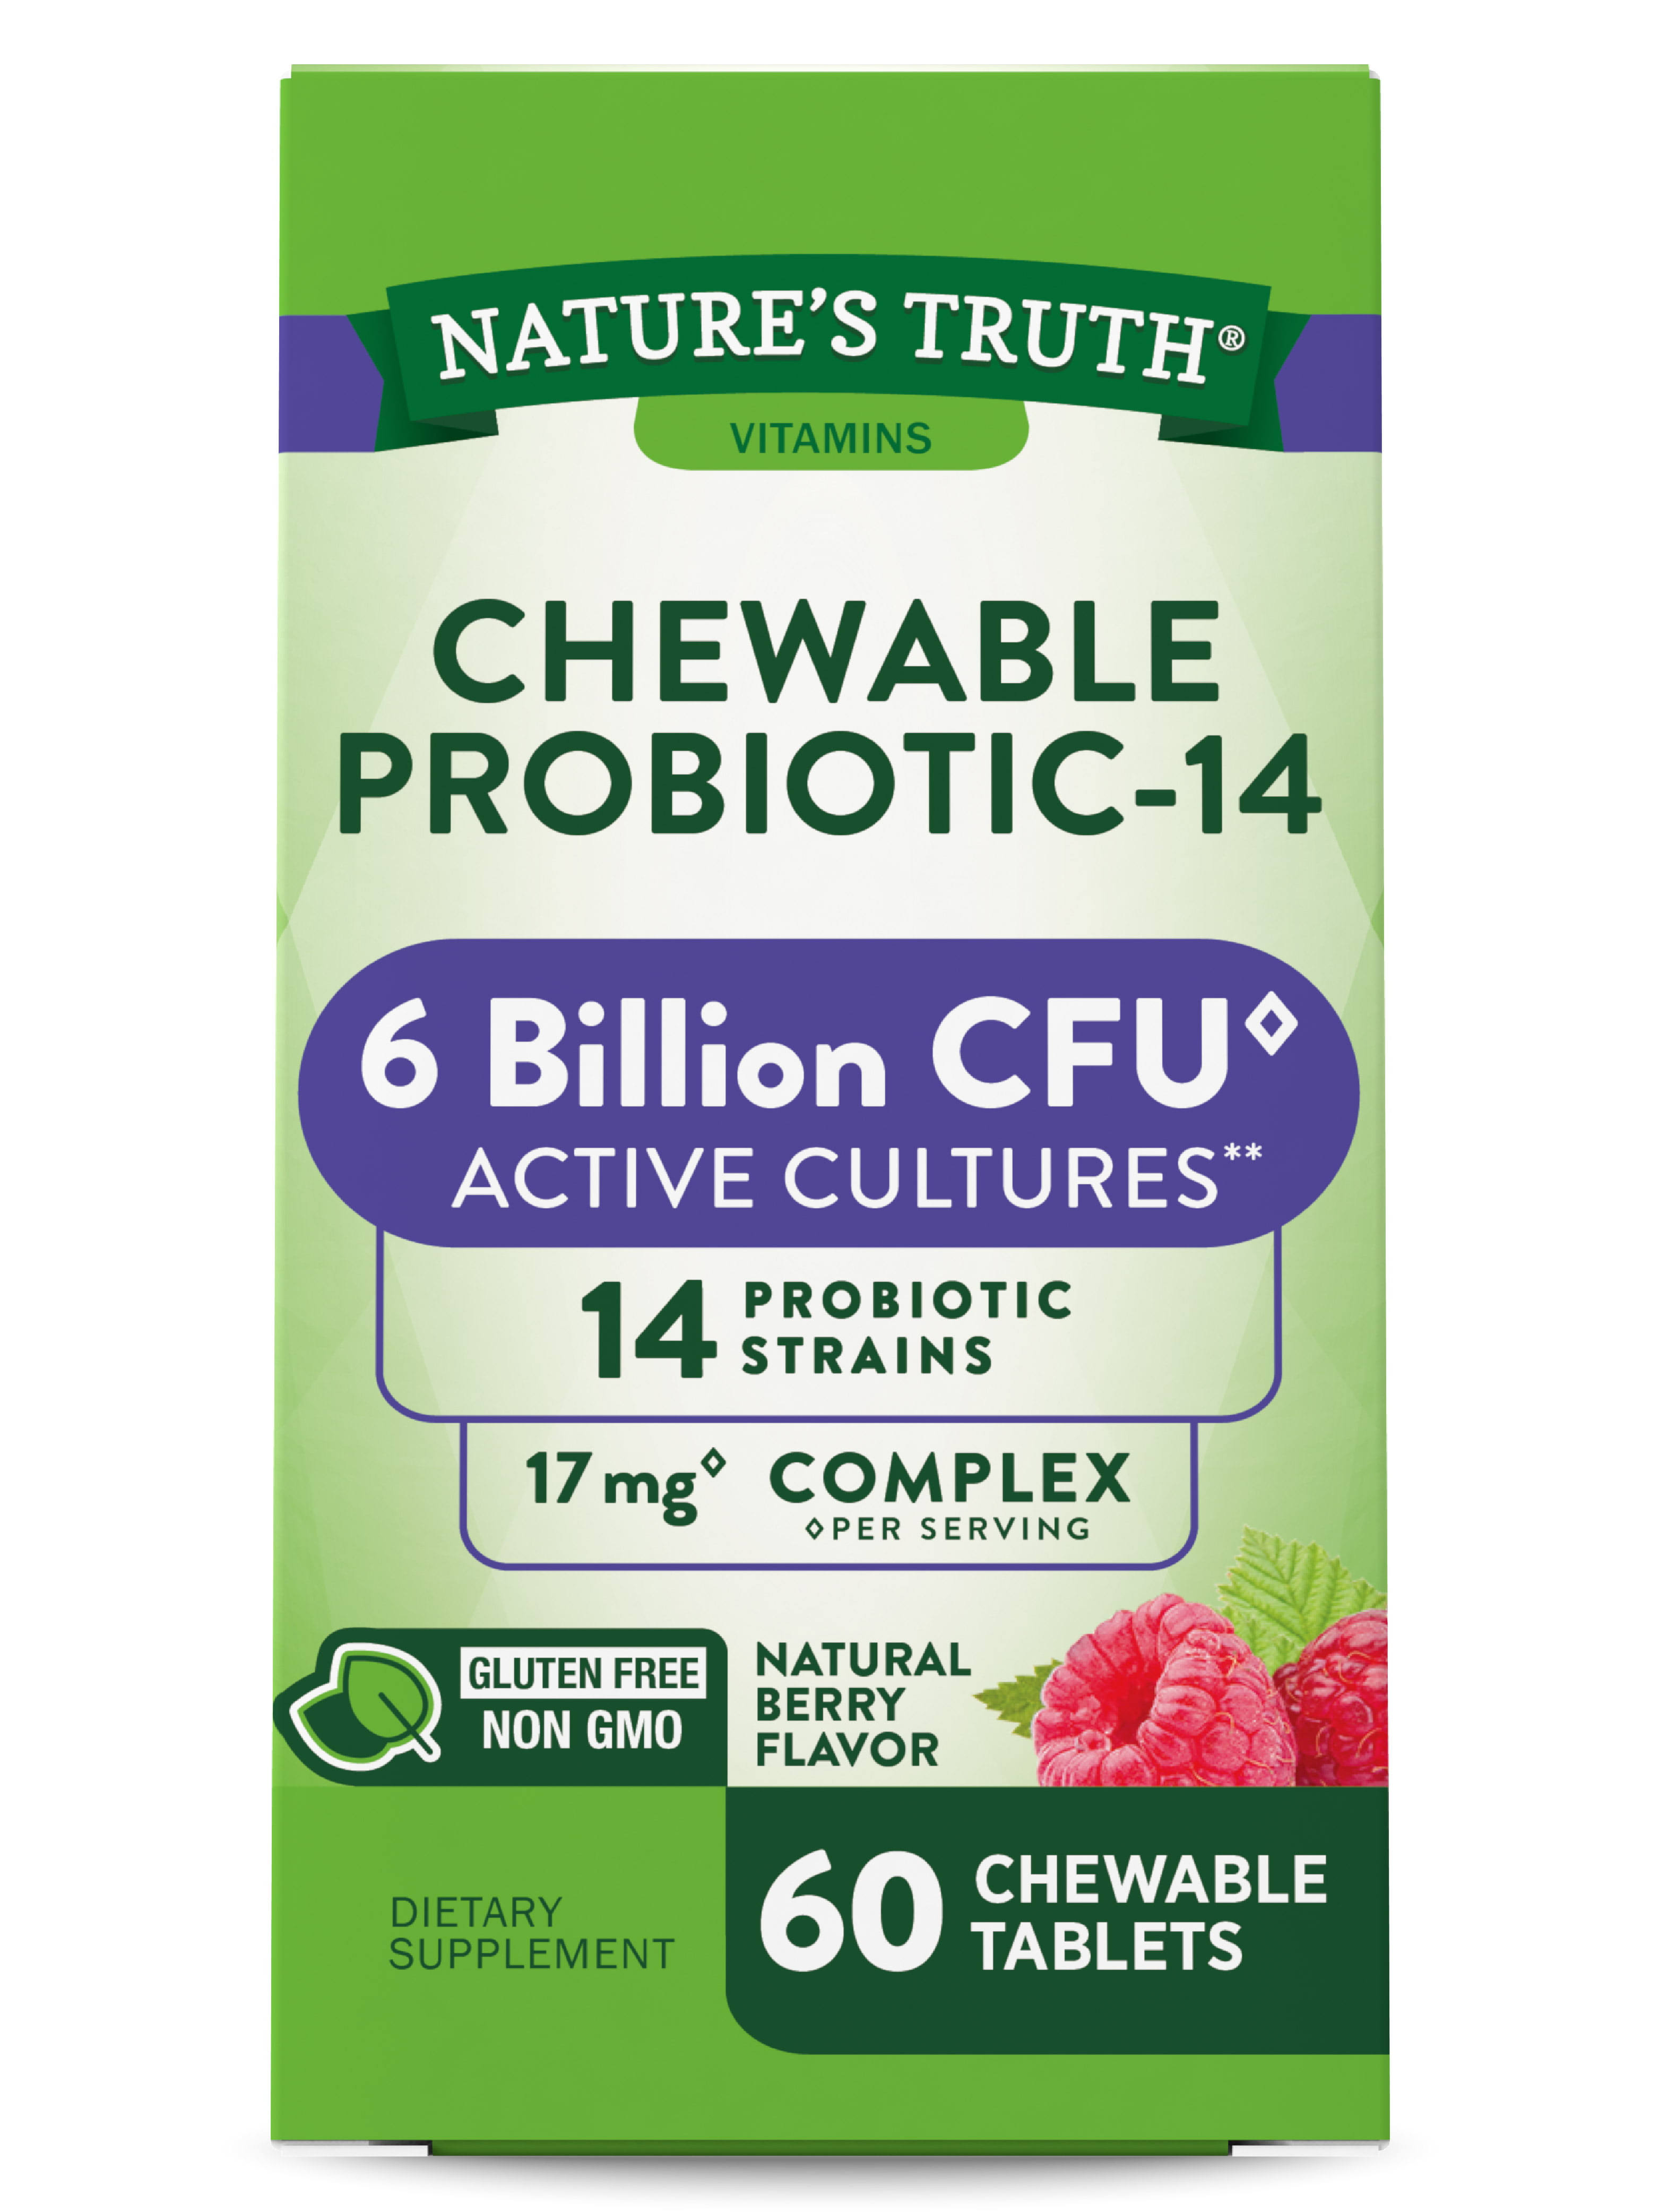 Nature's Truth Chewable Probiotic-10 Dietary Supplement - 60 Chewable Tablets, Berry